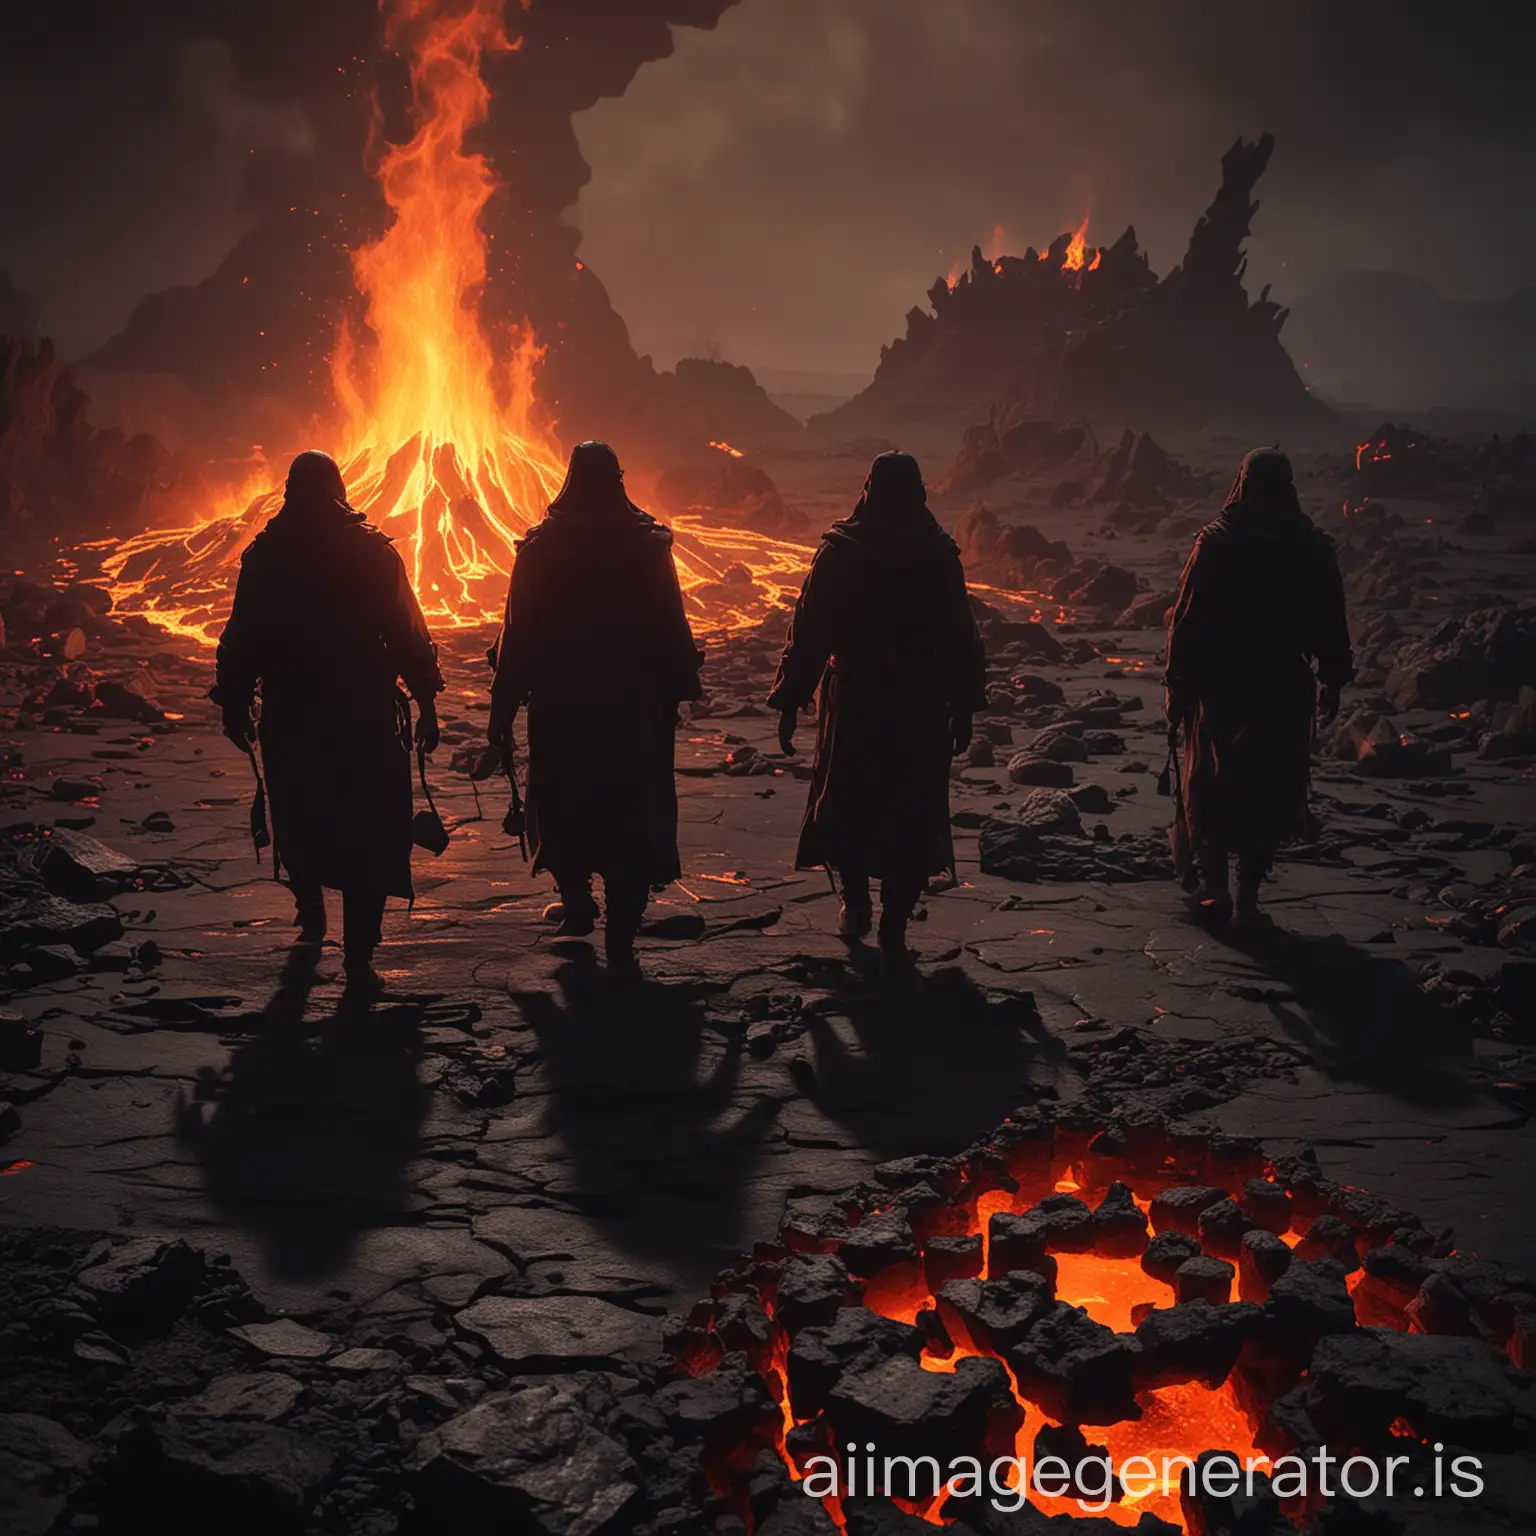 4 shadows  walking through the tartar surrounded by fire and lava